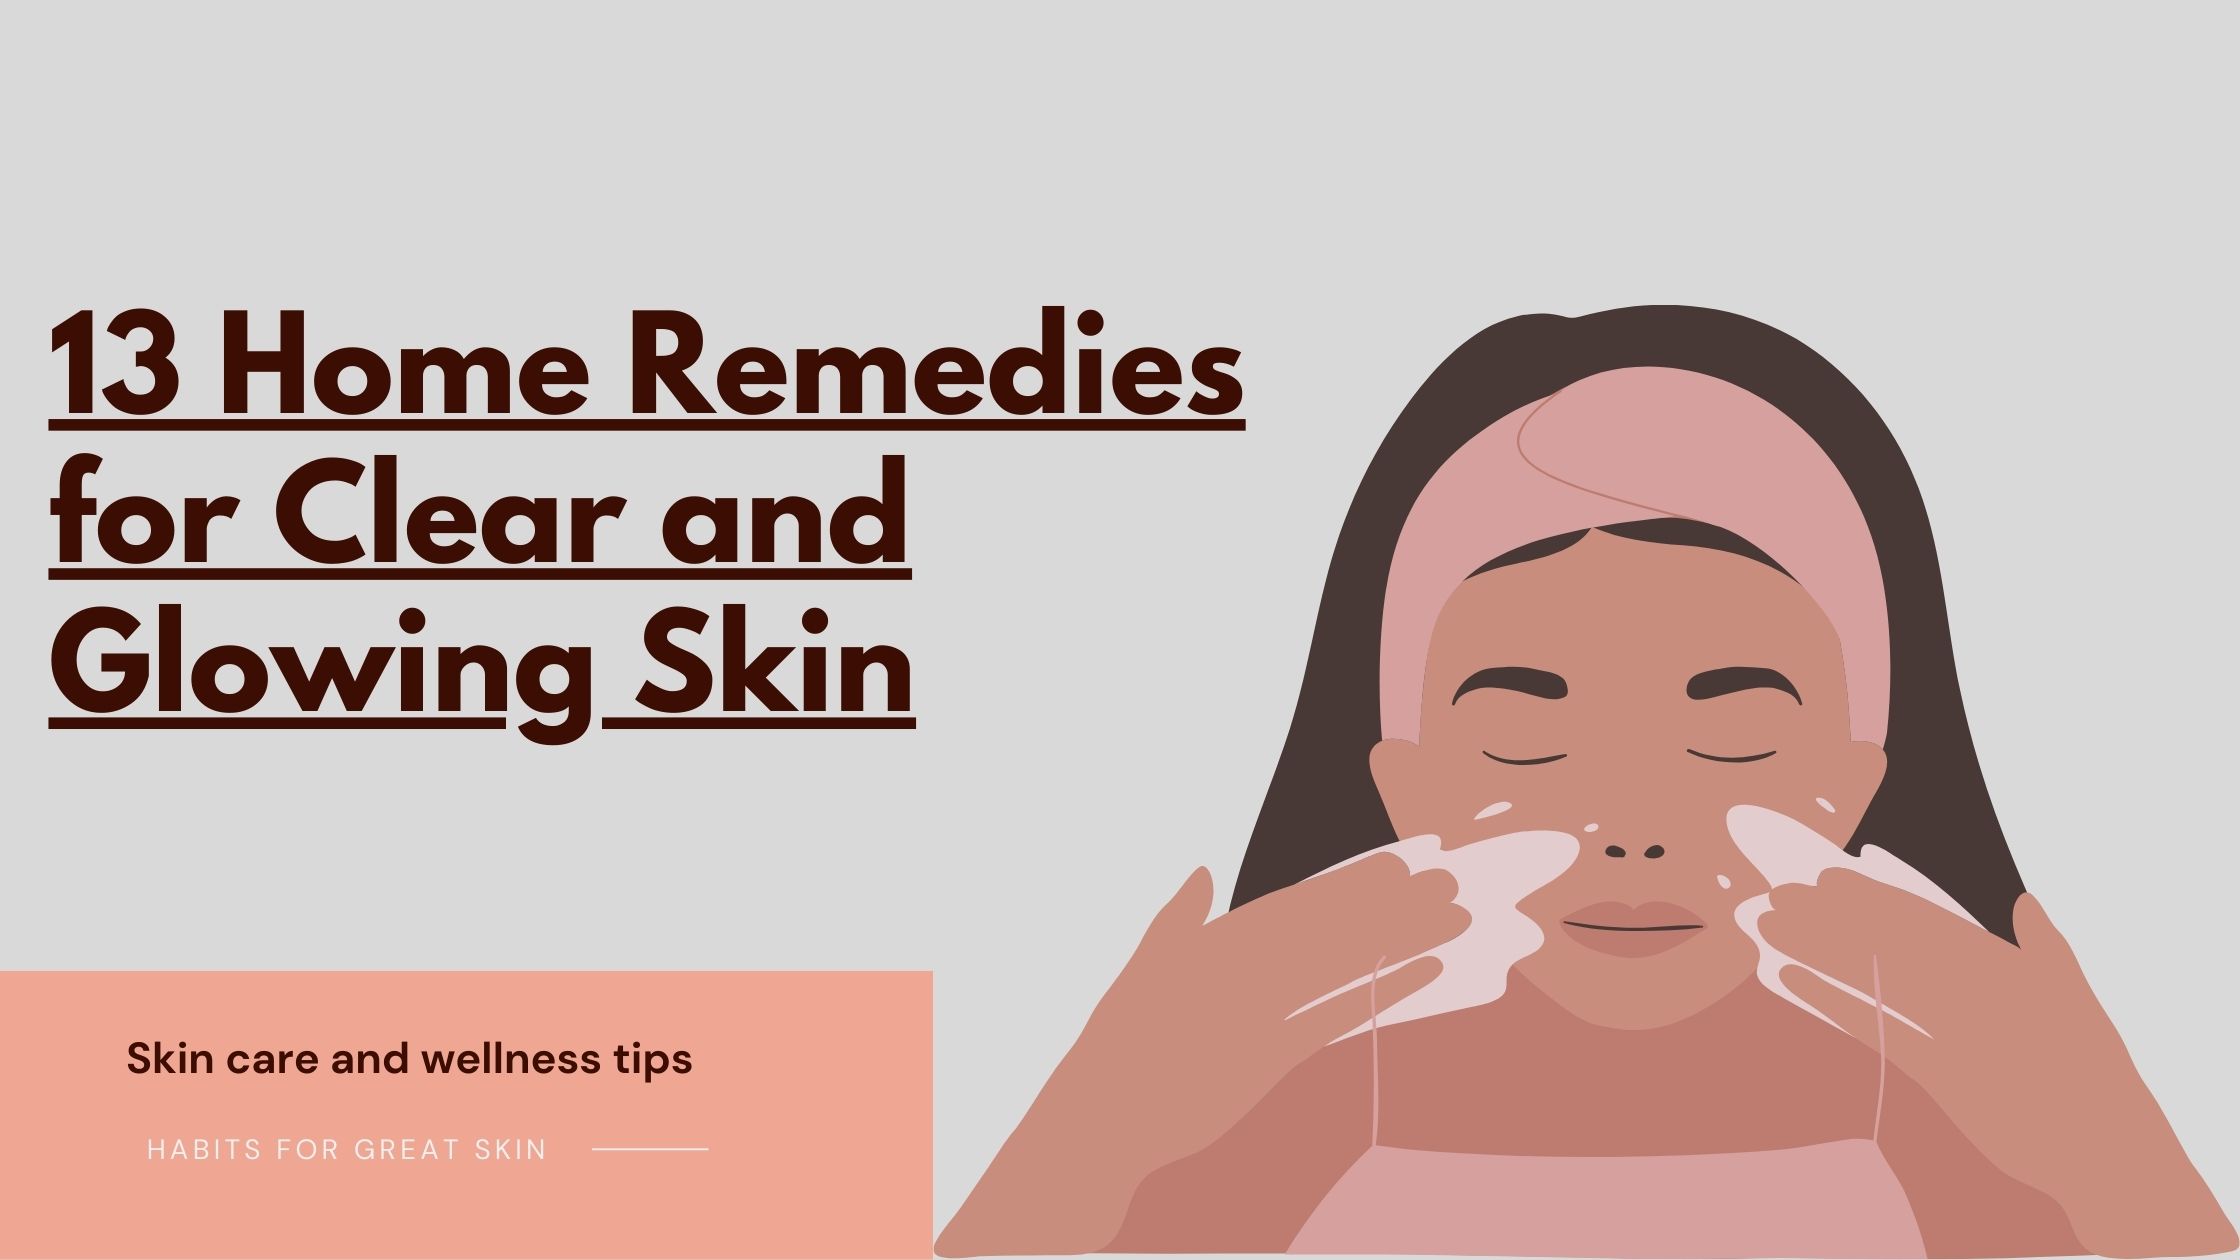 Home Remedies for Clear and Glowing Skin